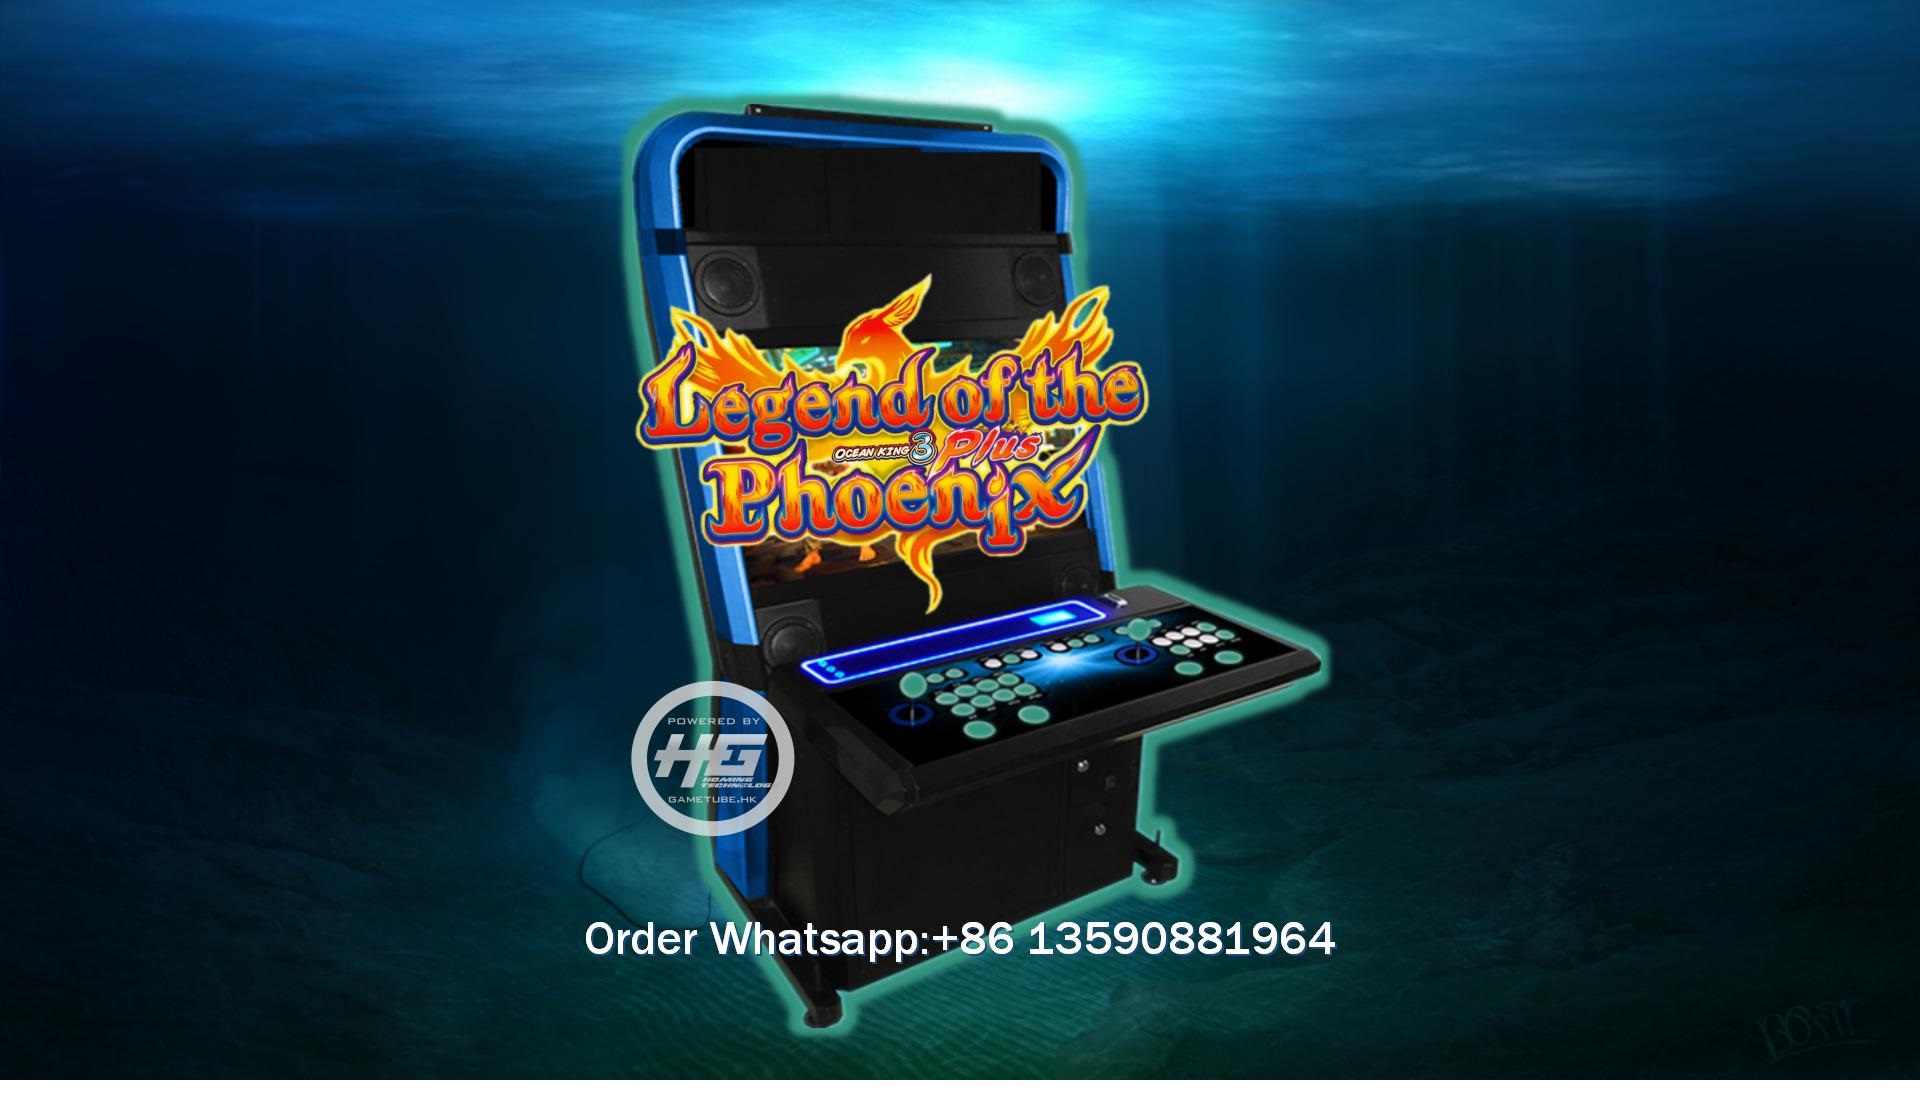 2 players fishing game,2 players fish game,2 players fish cabinet,2 players fish table,ocean king 3 plus buffalo thunder,igs buffalo thunder,buffalo thunder fishing game,Crab Avengers fishing game,ocean king 3 plus Crab Avengers,ocean king 3 plus Crab Avengers fishing game,Ocean King 3 Plus Aquaman Realm,Ocean King 3 Plus Aquaman Realm fishing game,Master of the Deep,Master of the Deep fishing game,Ocean King 3 Plus Master of the Deep,Ocean King 3 Plus Tiger Avengers,Ocean King 3 Plus Tiger Avengers fishing game,Ocean King 3 Plus Phoenix Avengers,Ocean King 3 Plus Phoenix Avengers fishing game,ocean king 2 fishing game,ocean king 2 golden legend,ocean king 2 ocean monster,ocean king 2 plus,ocean king 2 plus thunder dragon,thunder dragon fishing game,ocean monster fishing game,ocean monster plus fishing game,ocean king 2,ocean monster,ocean monster plus,thunder dragon,ocean king 3,ocean king 3 monster awaken,monster awaken fishing game,ocean king 3 plus fire phoenix,ocean king 3 plus fire phoenix fishing game,dragon lady of treasures,ocean king 3 plus raging fire,ocean king 3 plus buffalo thunder,fishing game,fish game,angry deep whale,angry deep whale fishing game,angry deep whale fish game,6 players fishing cabinet,6 players fish table,8 players fishing cabinet,8 players fish table,fish cabinets,fishing table,igs,igs fishing game,fish code box,fish code box,install fishing game,install fish cabinets,6 players fire phoenix fishing game,fire phoenix fish table,ocean king 3 plus blackbeard